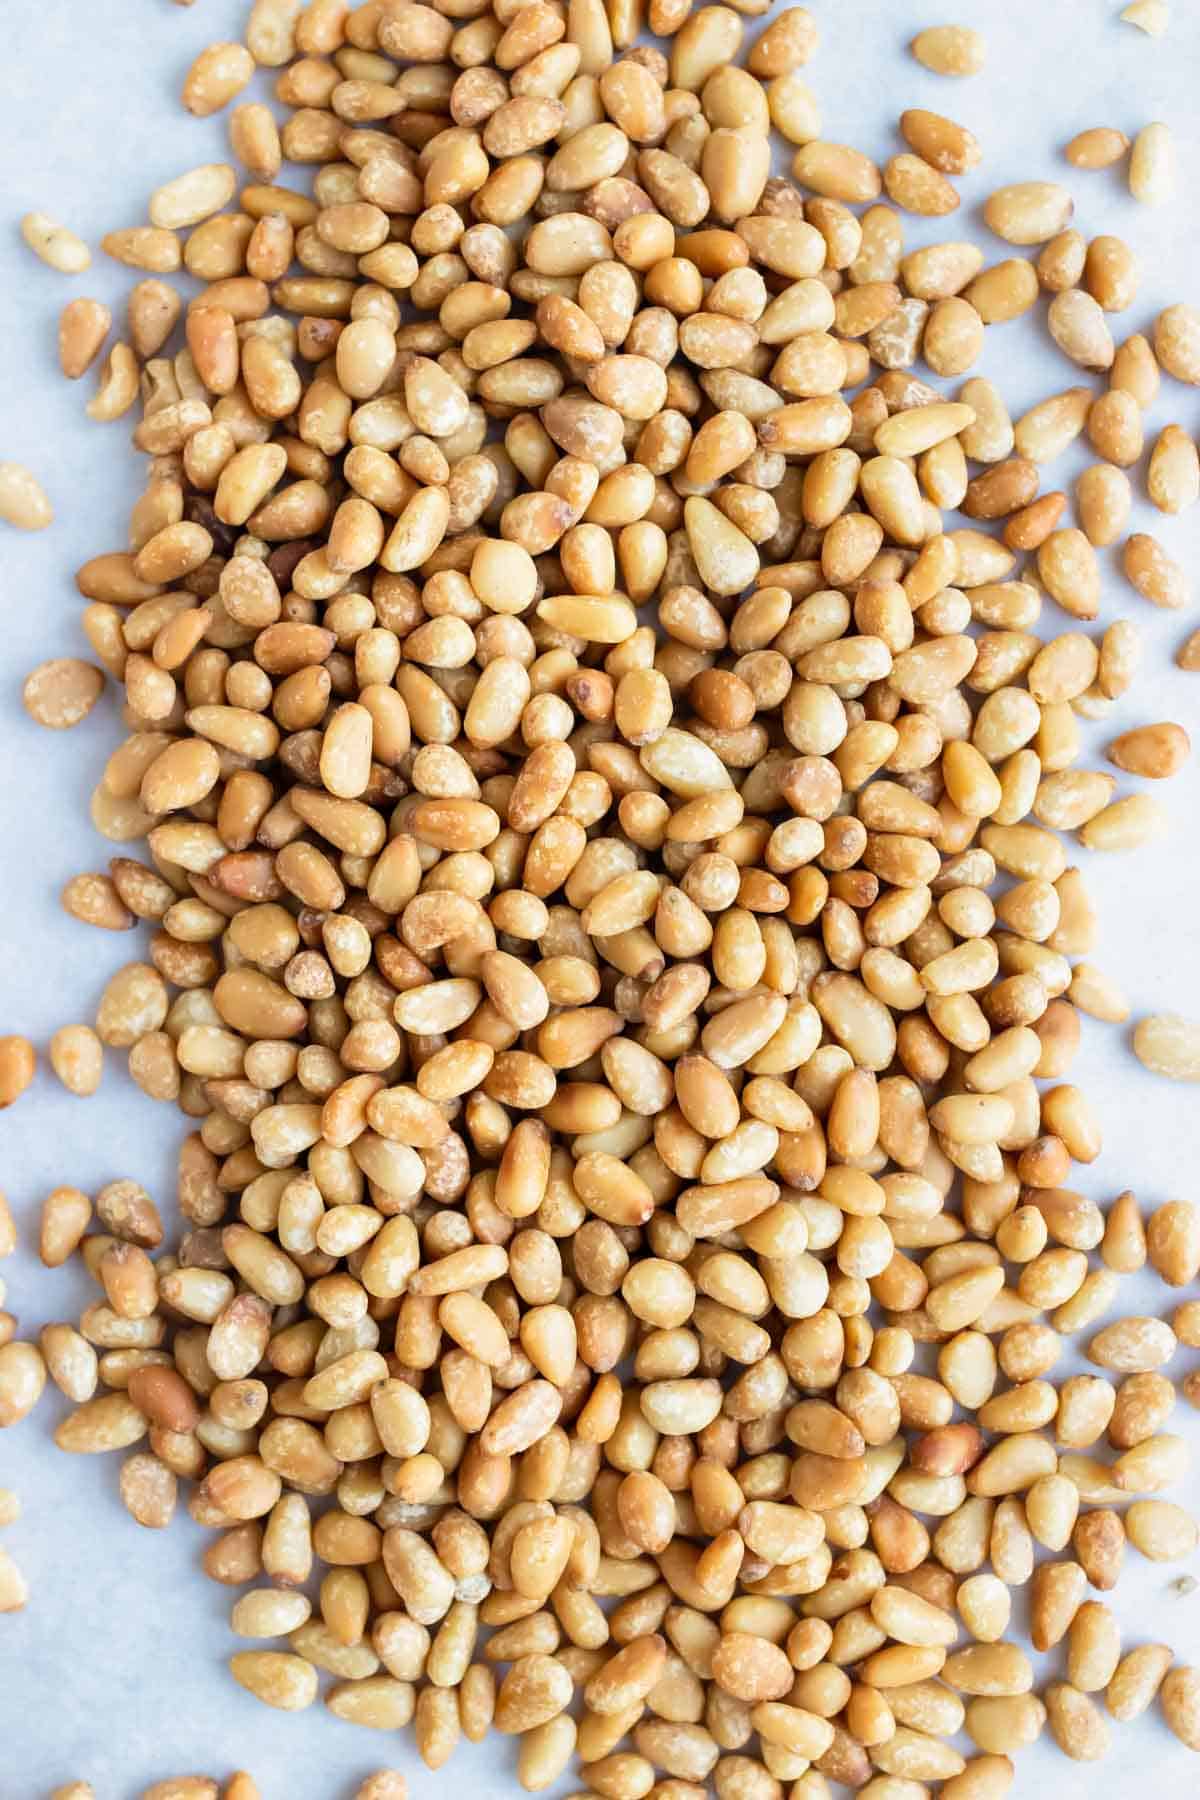 Learn how to quickly and easily toast pine nuts in the oven on a baking sheet.